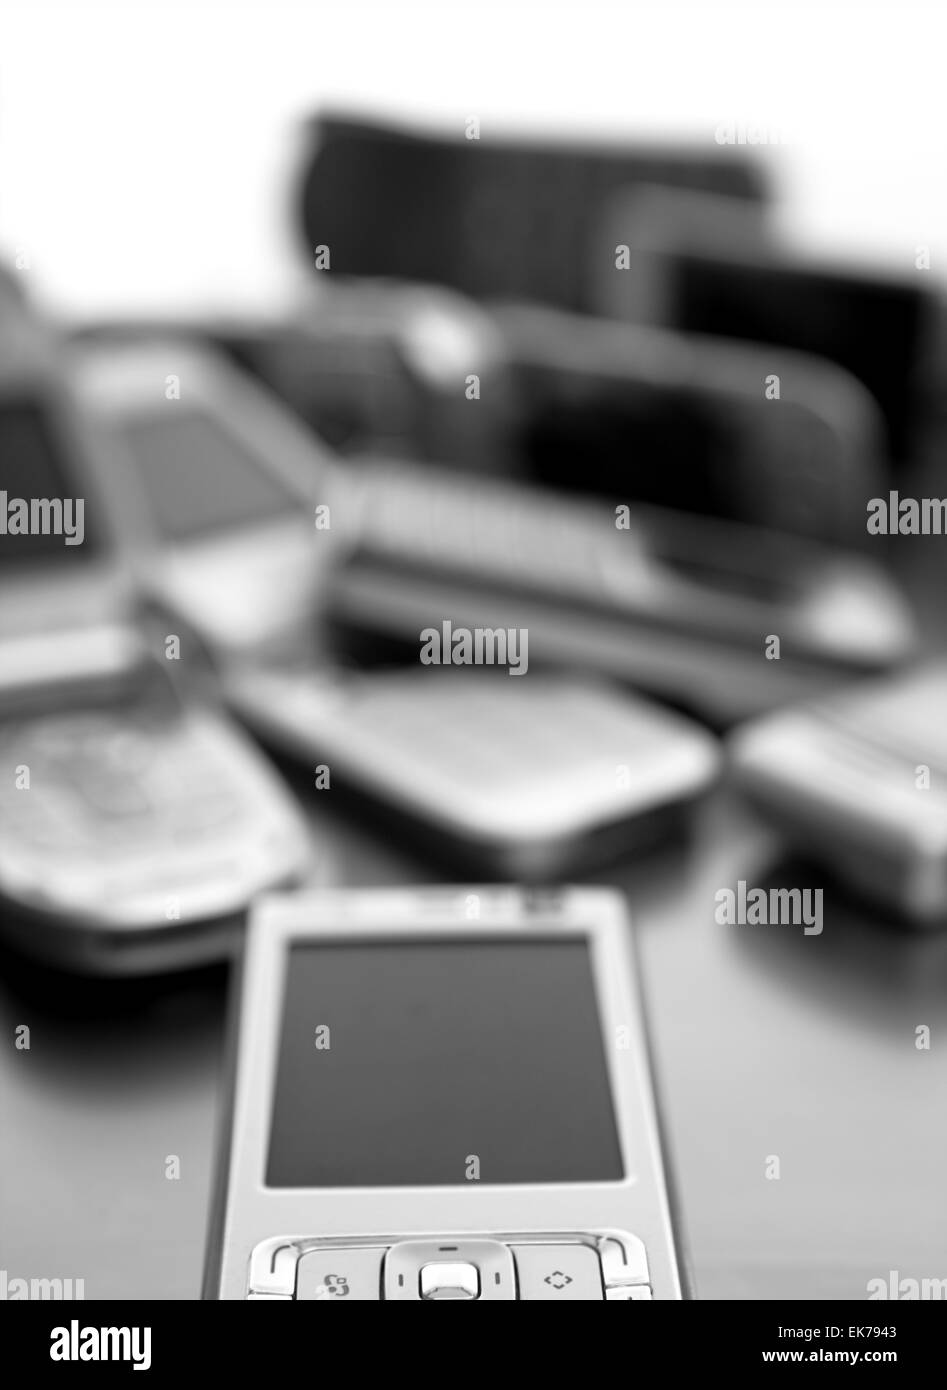 Assorted mixed mobile phones Stock Photo